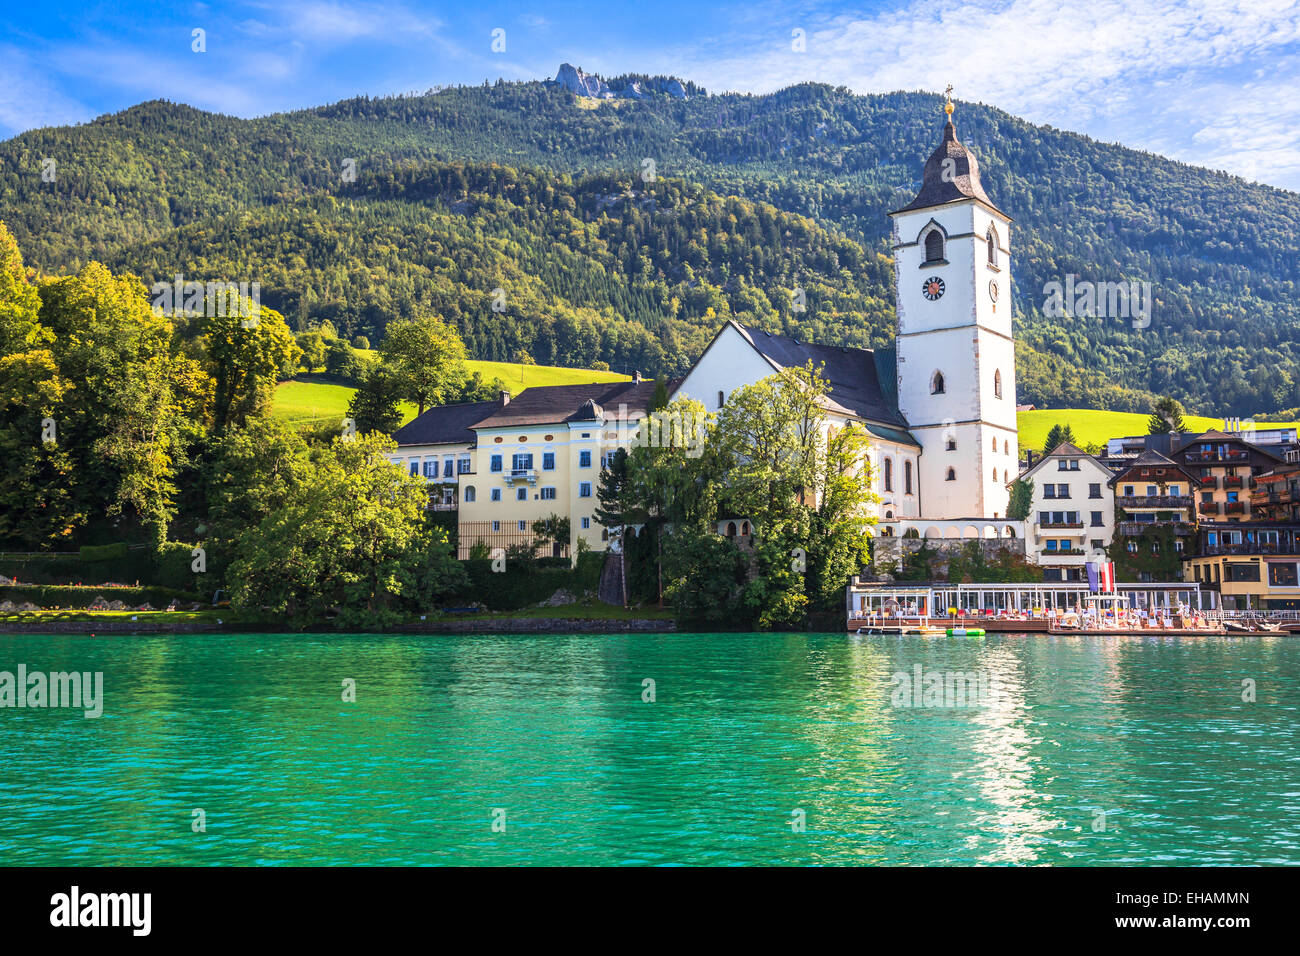 View of Parish Church at St. Wolfgang in Austria Stock Photo